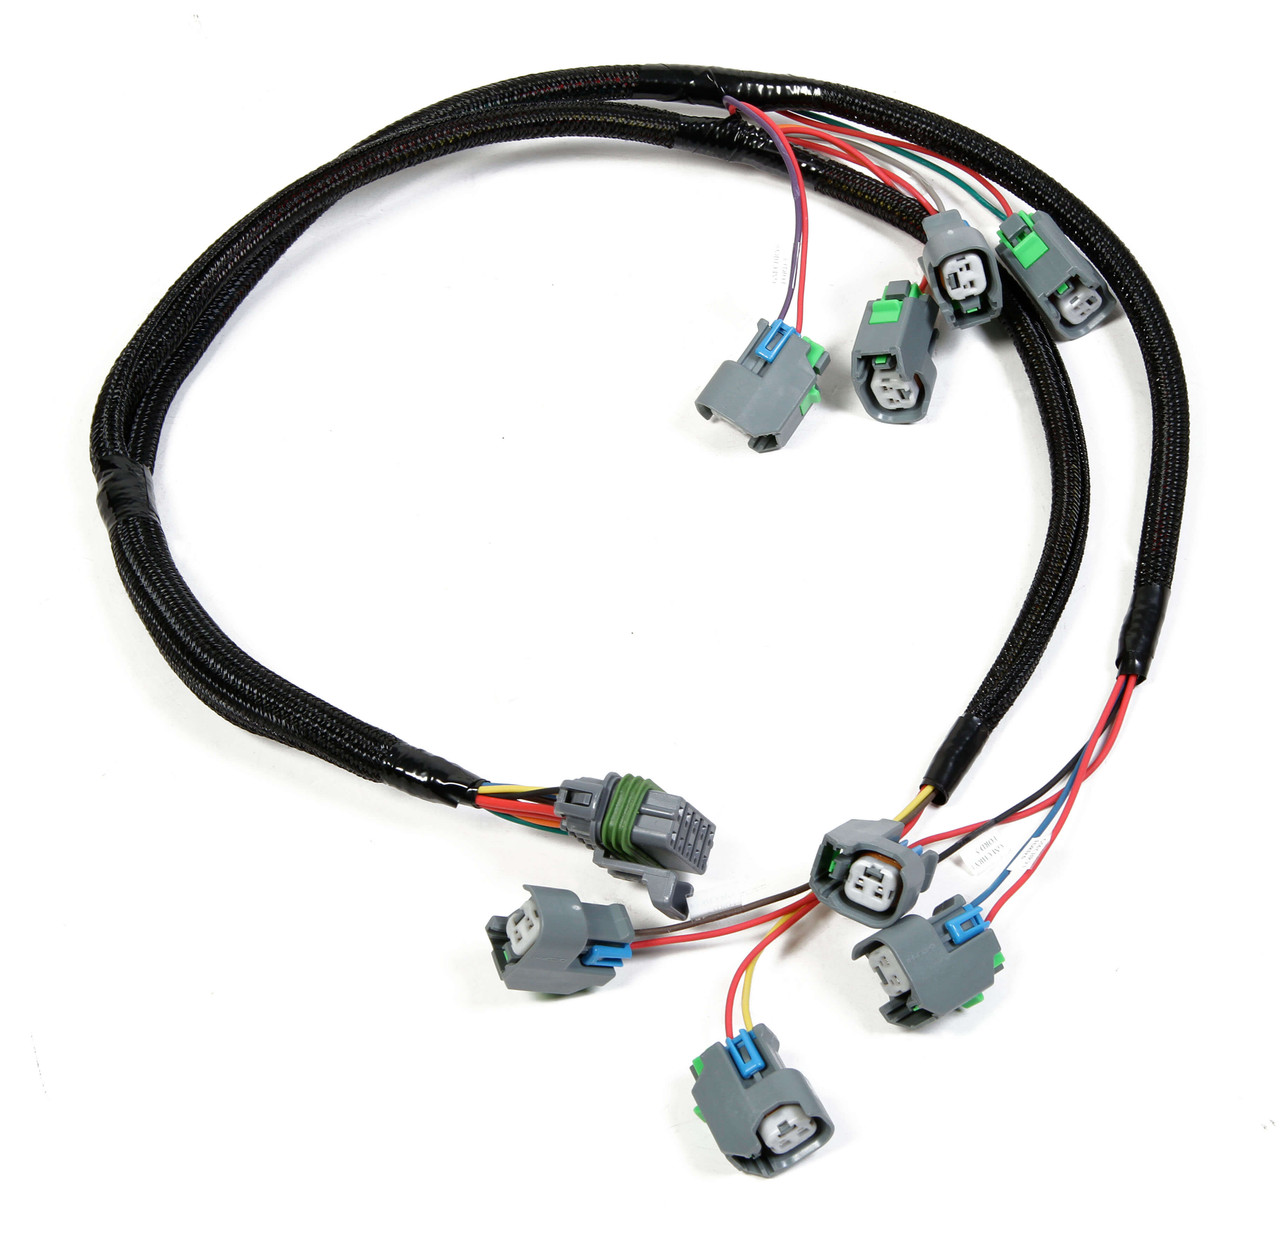 558-201 Holley EFI LSx Injector Harness - For EV6 Style Injectors